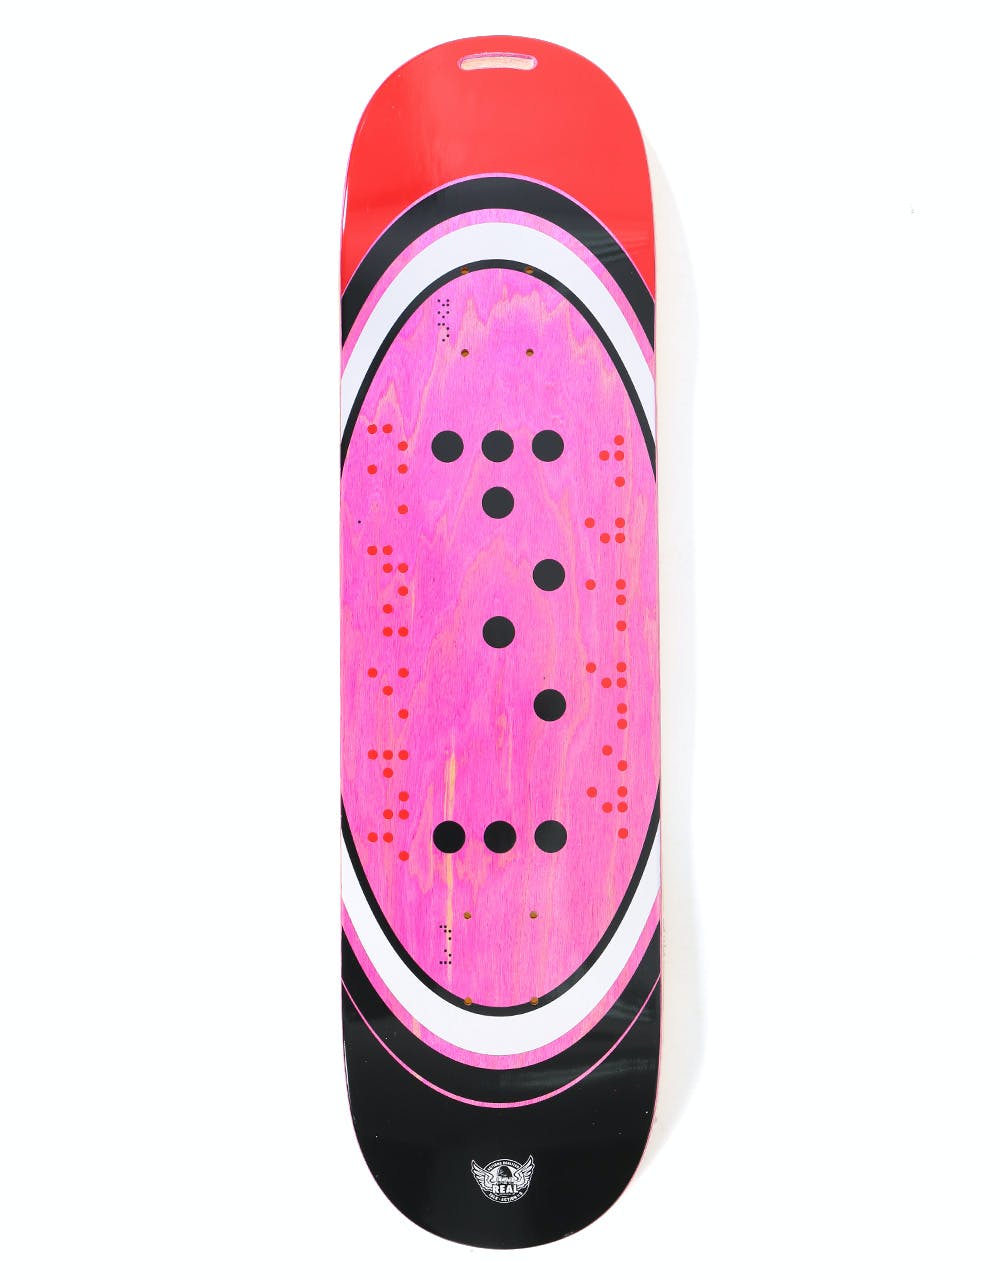 Real Braille Actions Realized Skateboard Deck - 8.06"